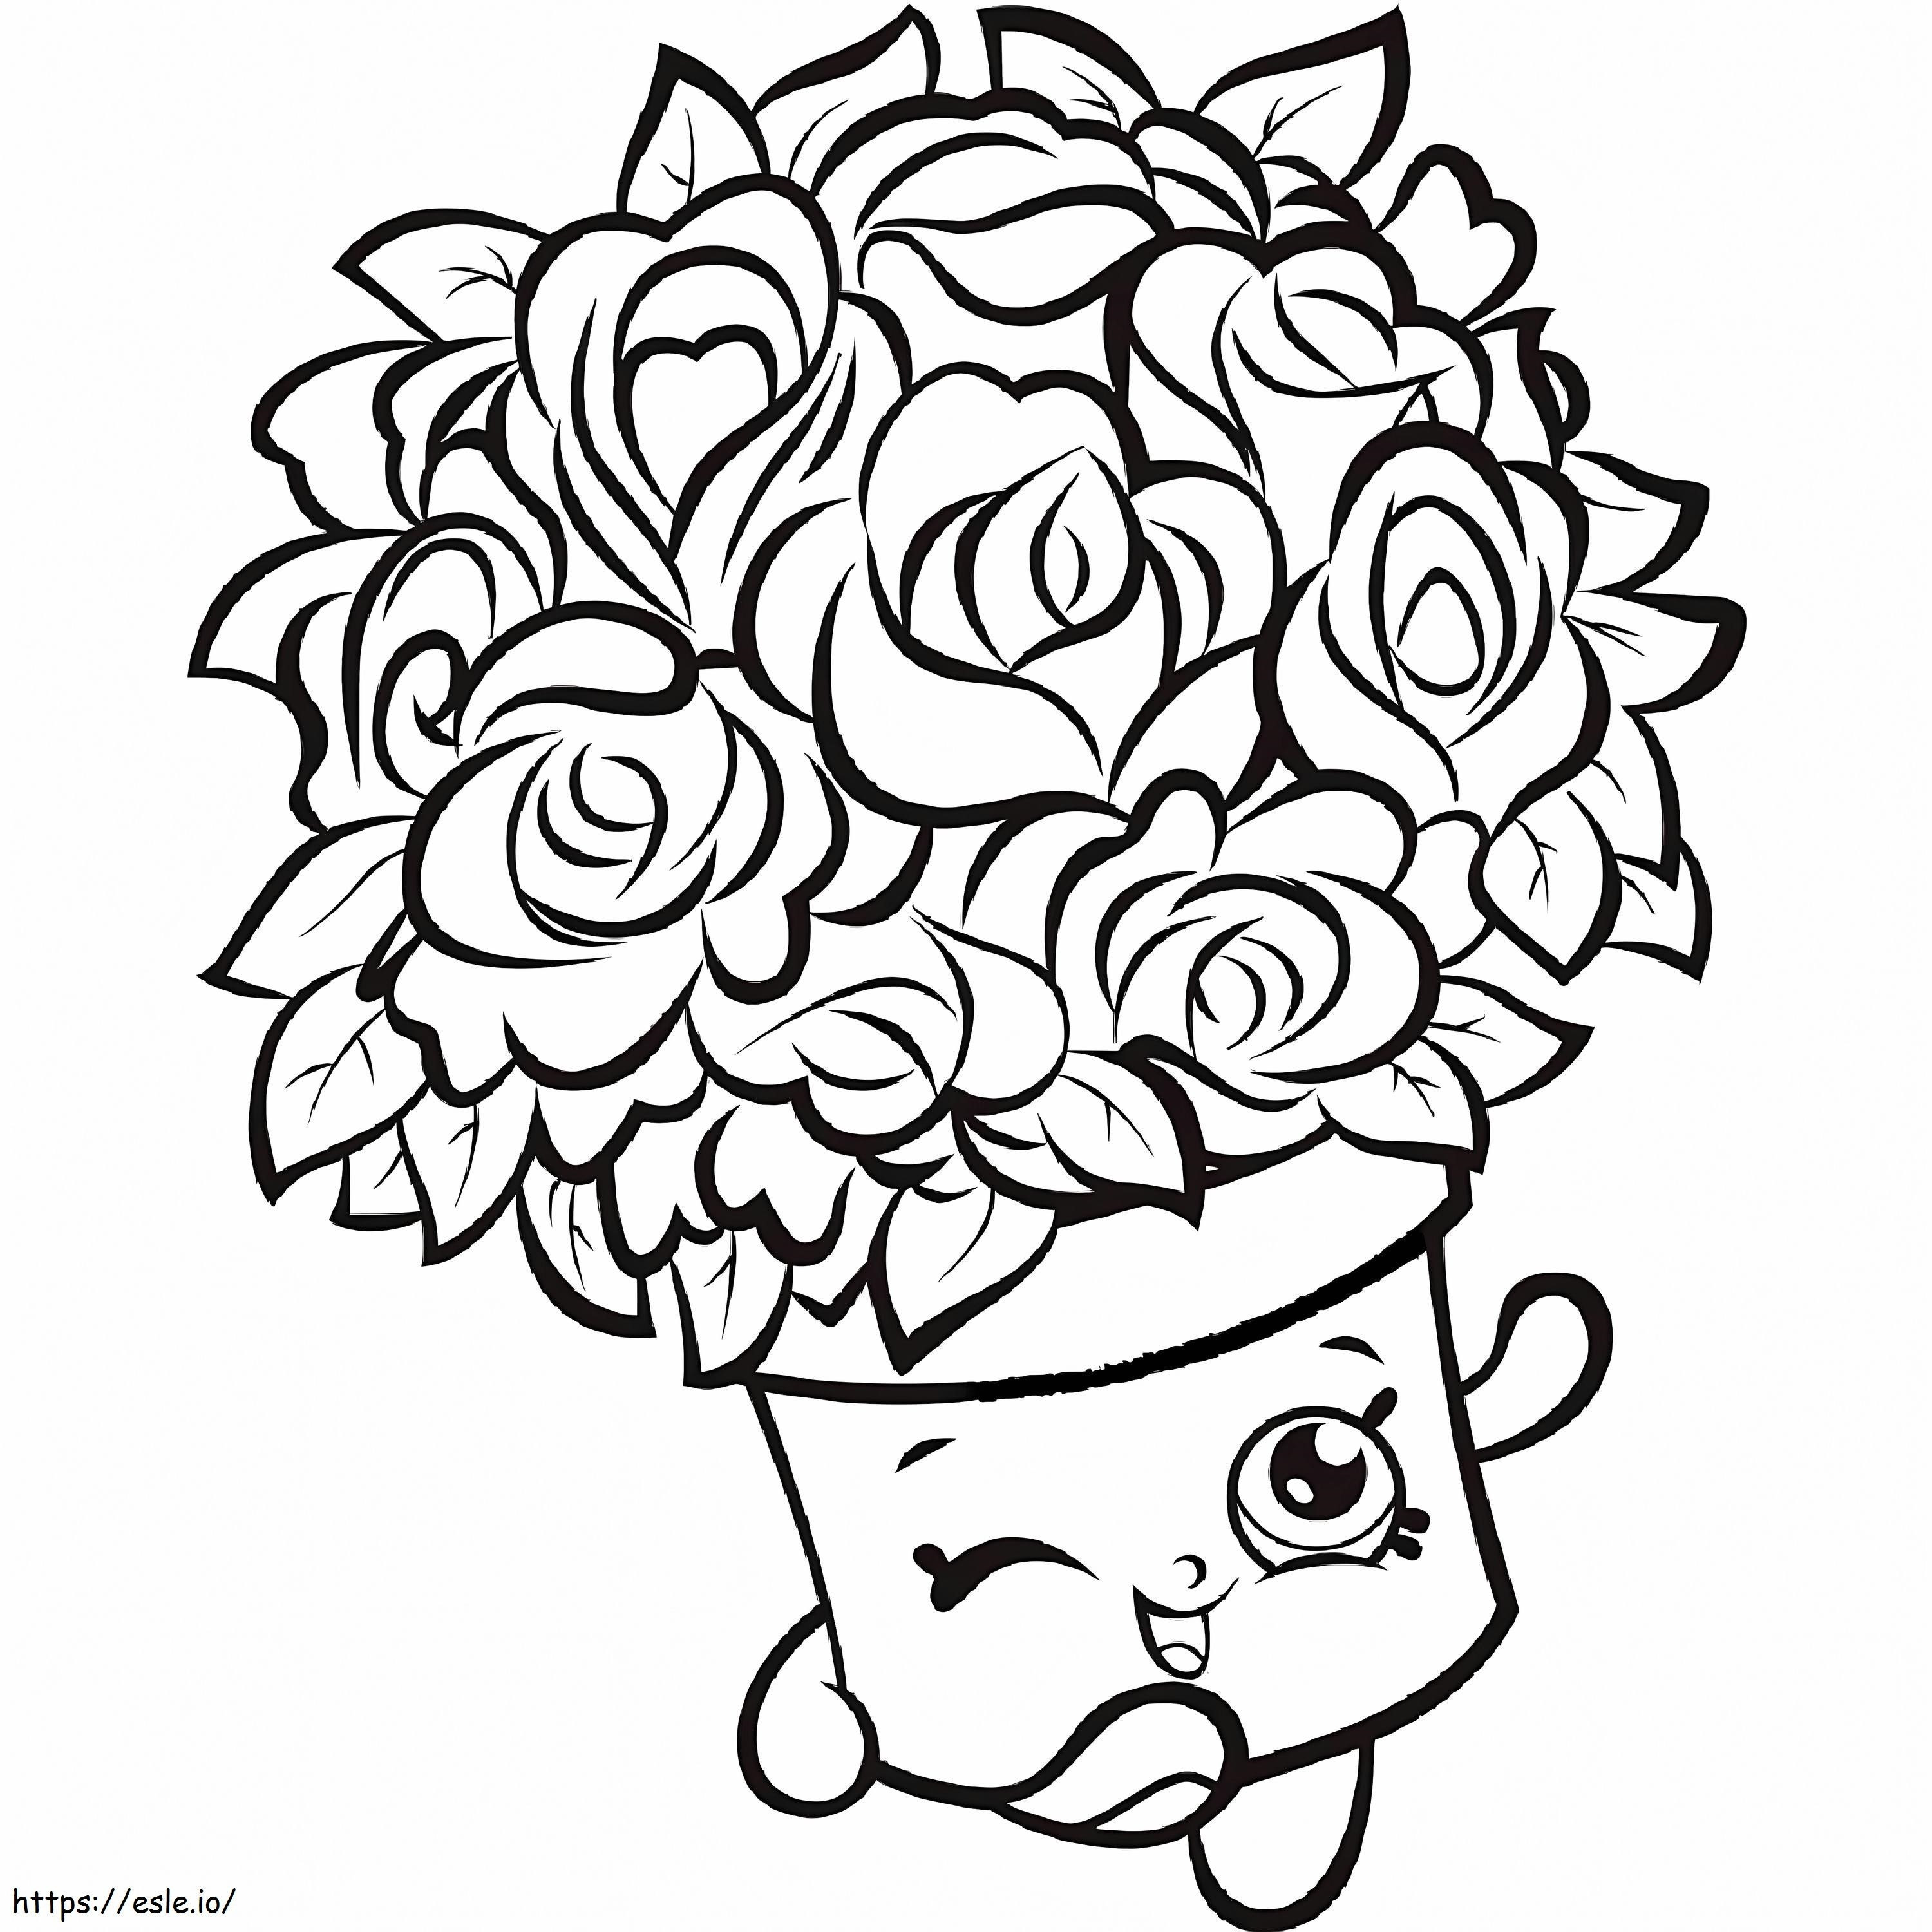 Betty Bouquet Shopkin 2 coloring page